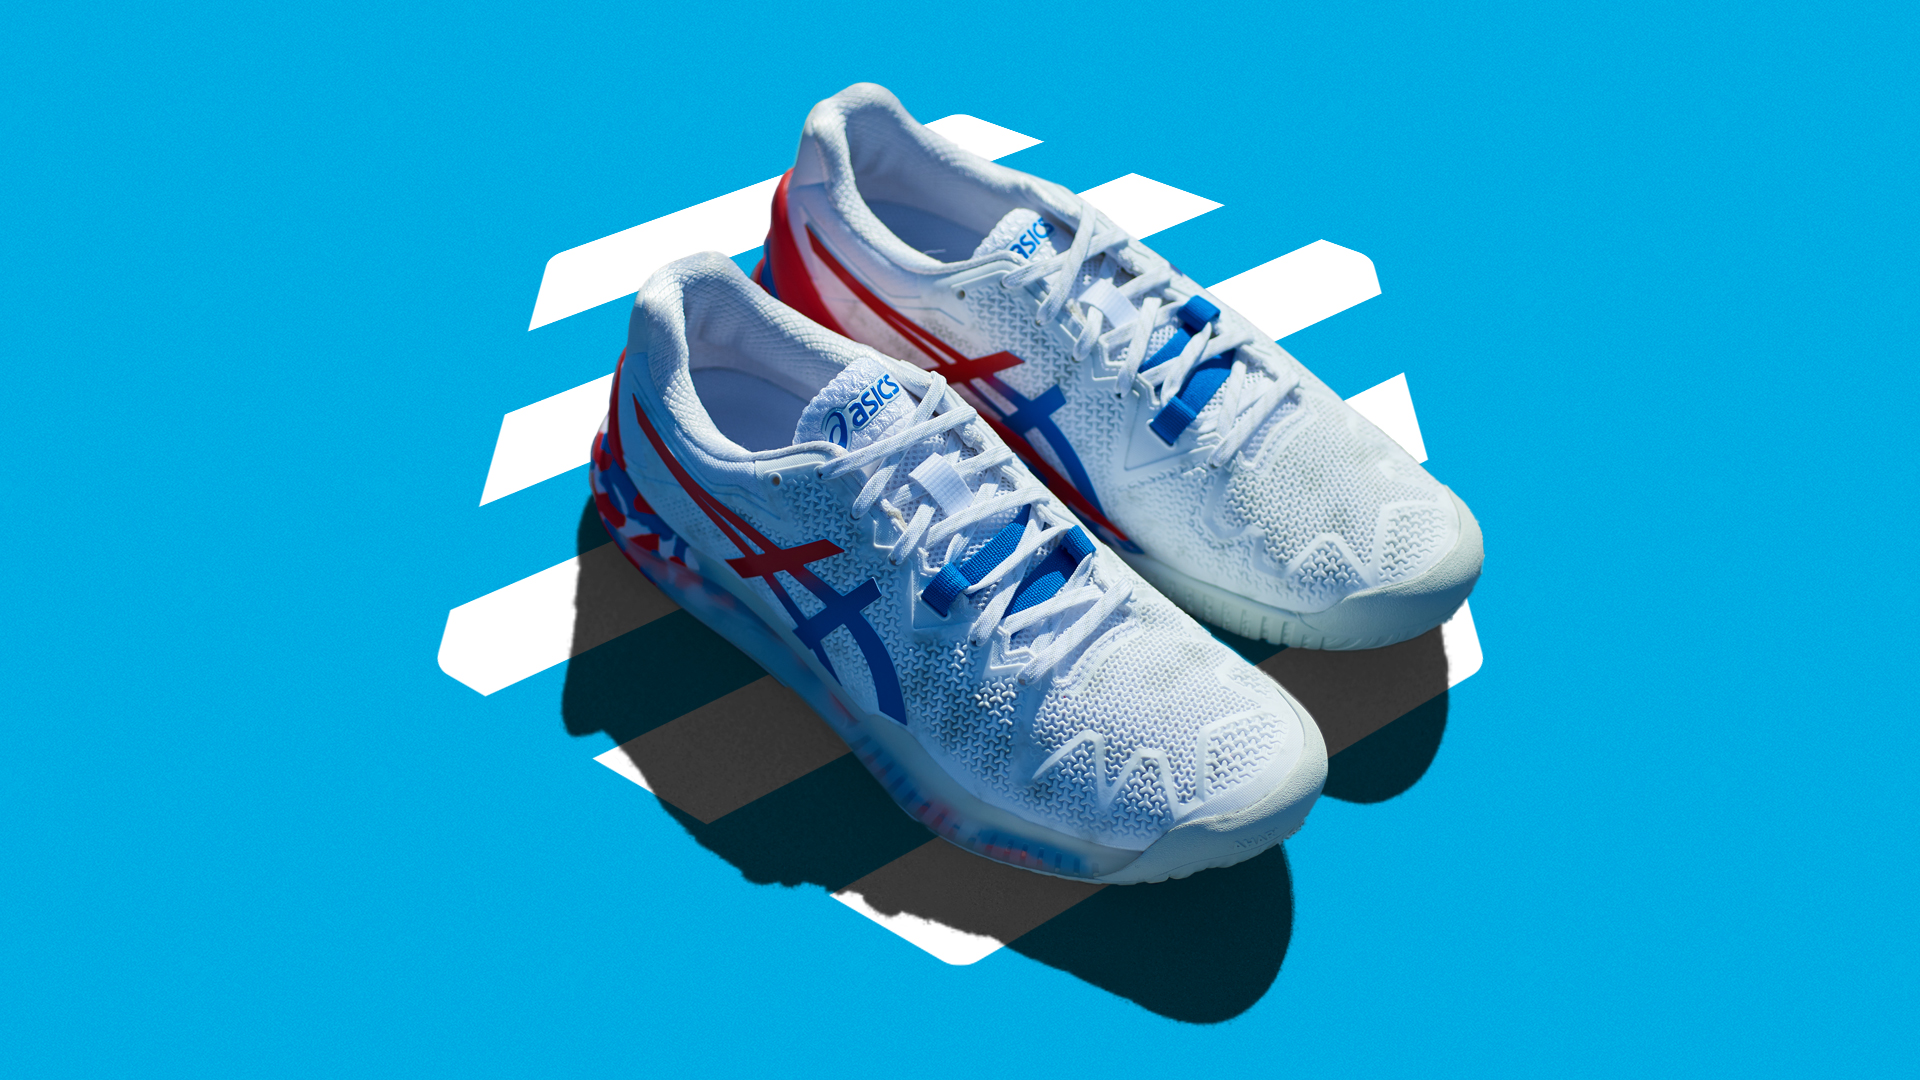 These New Asics Tennis Trainers Developed By Gael Monfils Will Make You ...